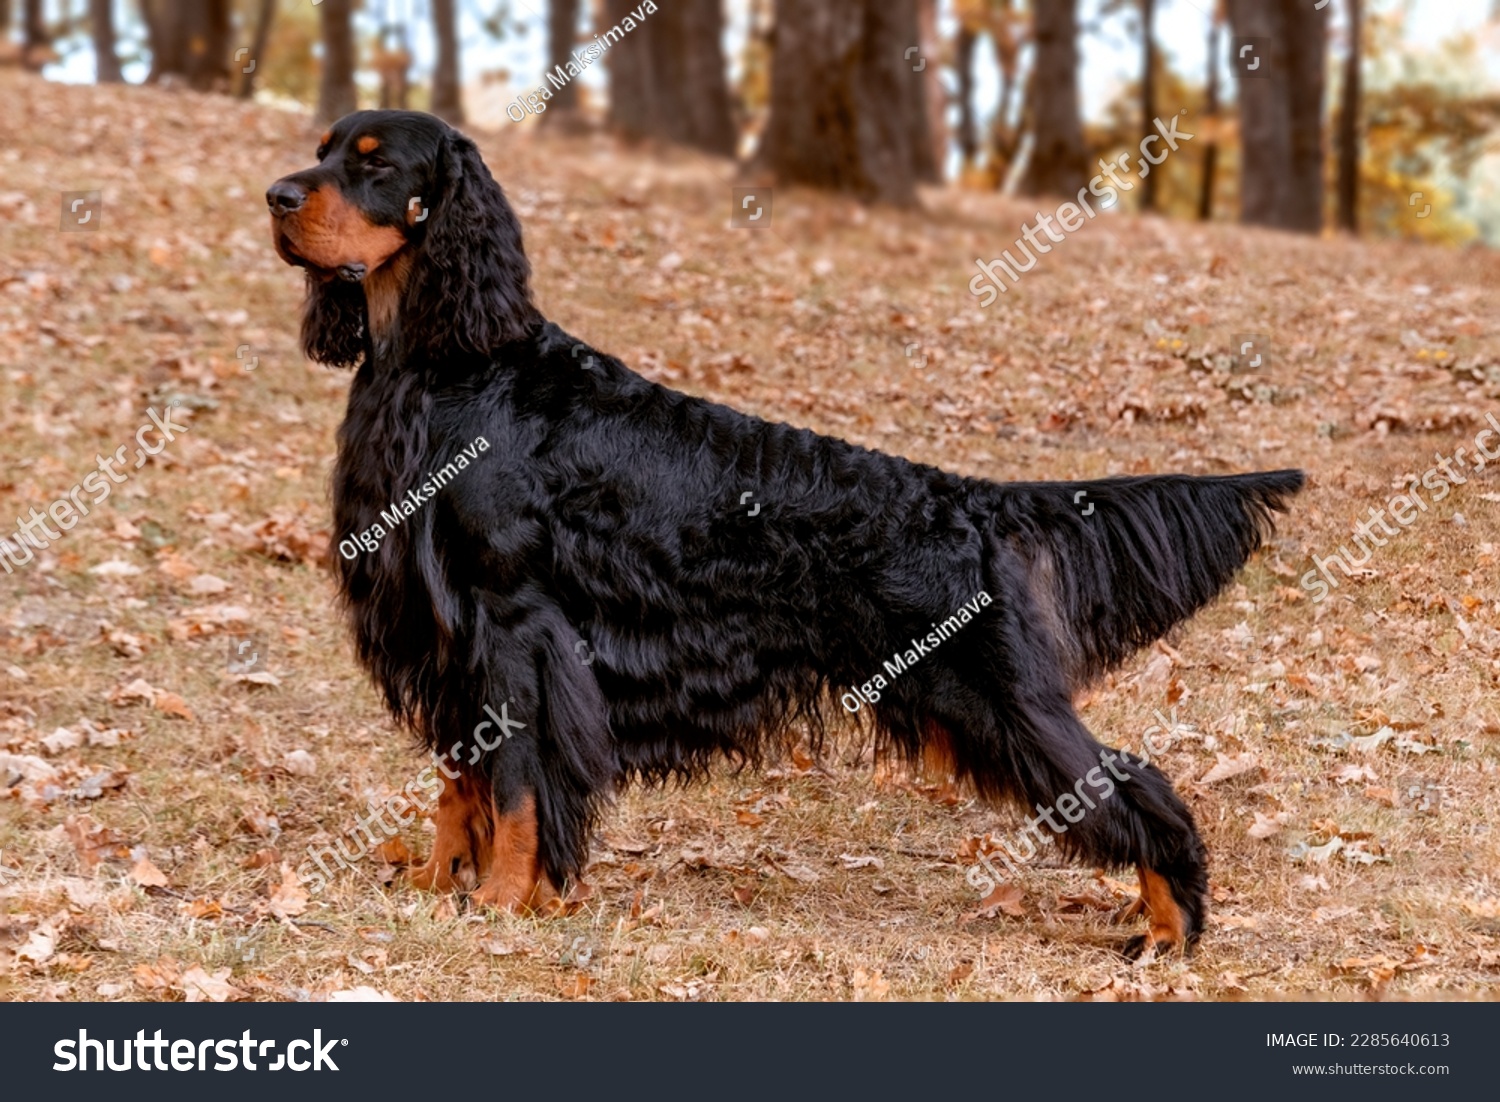 Magnificent Gordon Setter hunting dog standing in the  in the autumn forest #2285640613